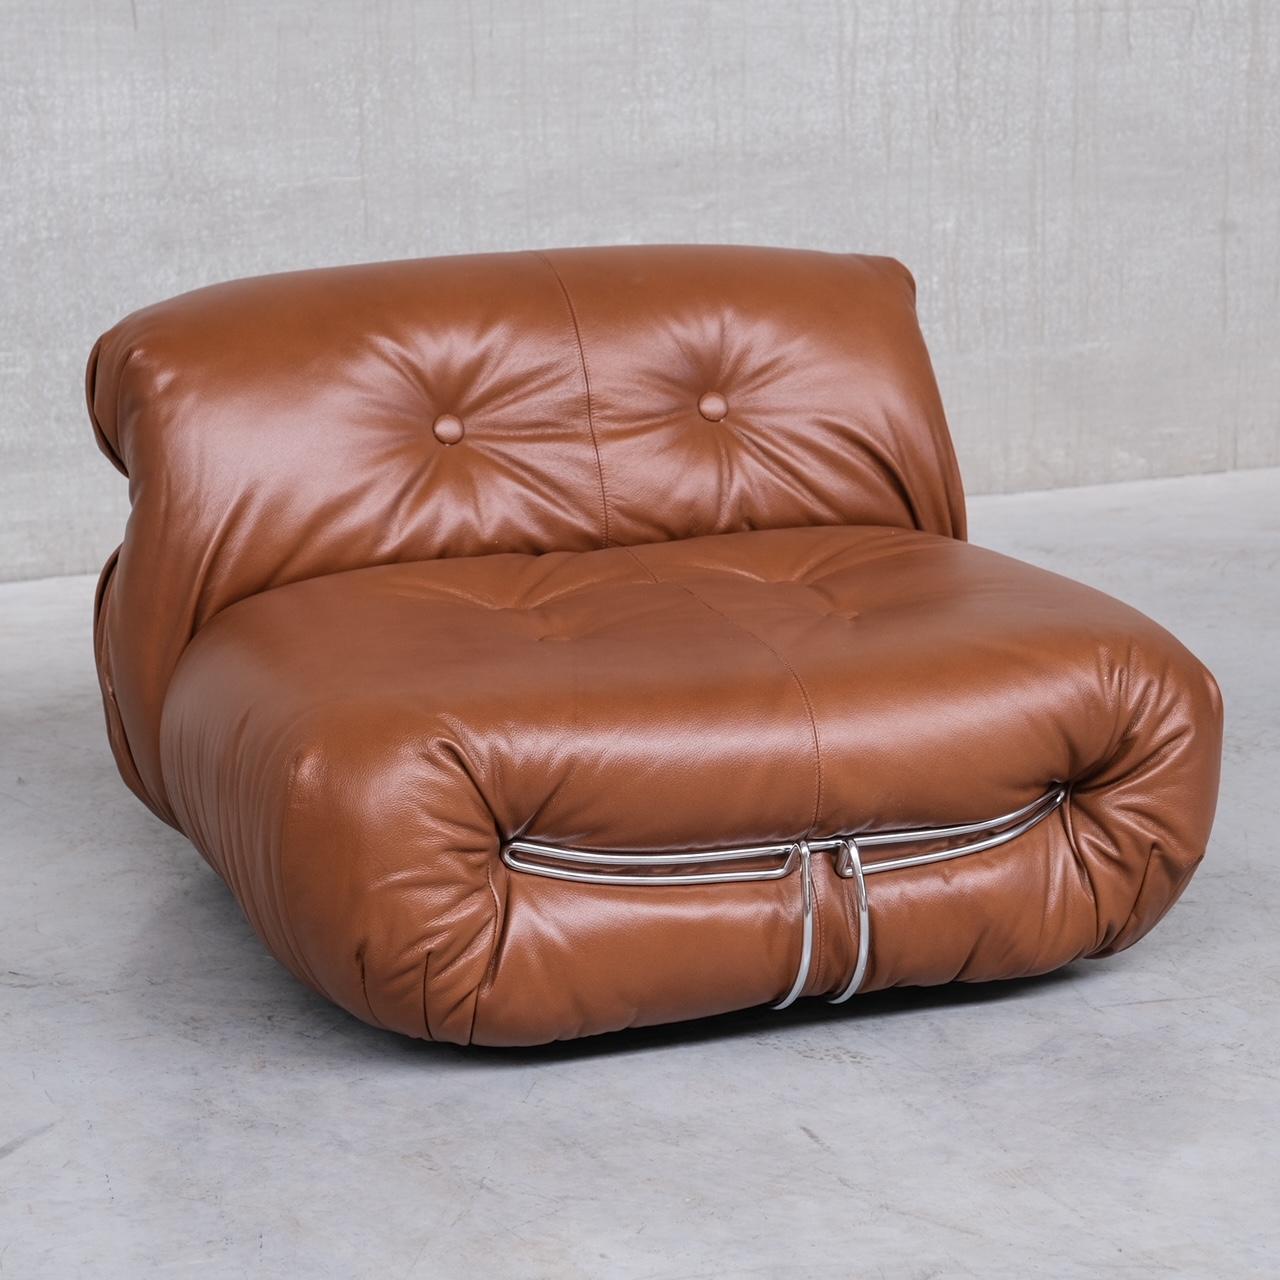 Late 20th Century Pair of Leather Soriana Lounge Chairs by Scarpa for Cassina